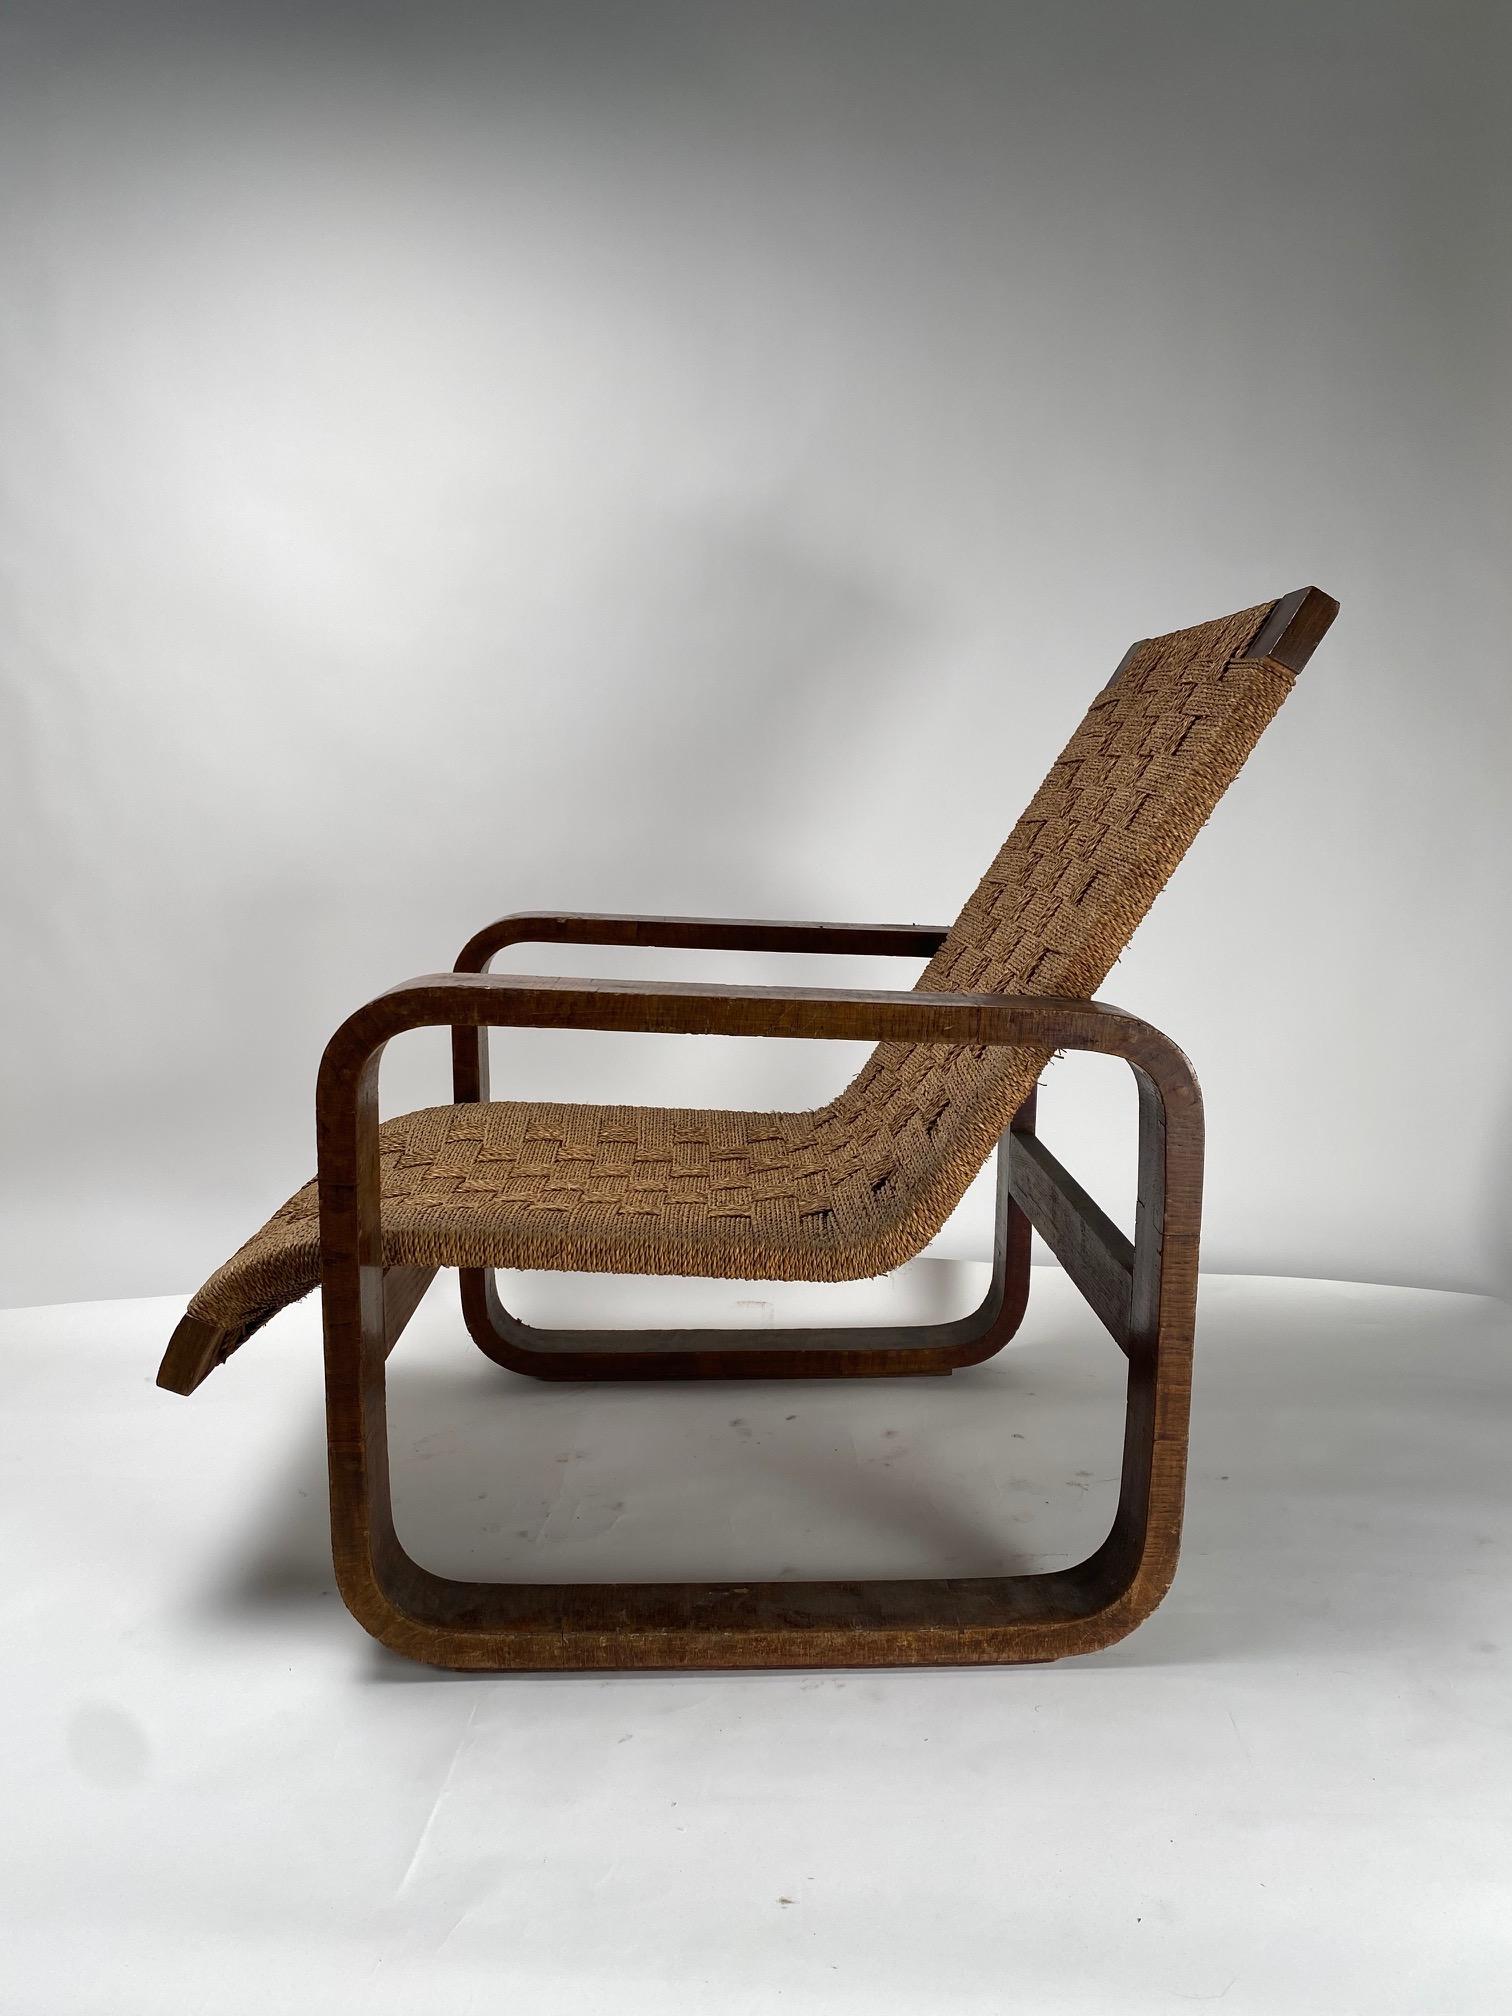 Mid-20th Century Sculptural Armchair in wood and rope, Giuseppe Pagano (Attr), Italy, 1940s For Sale